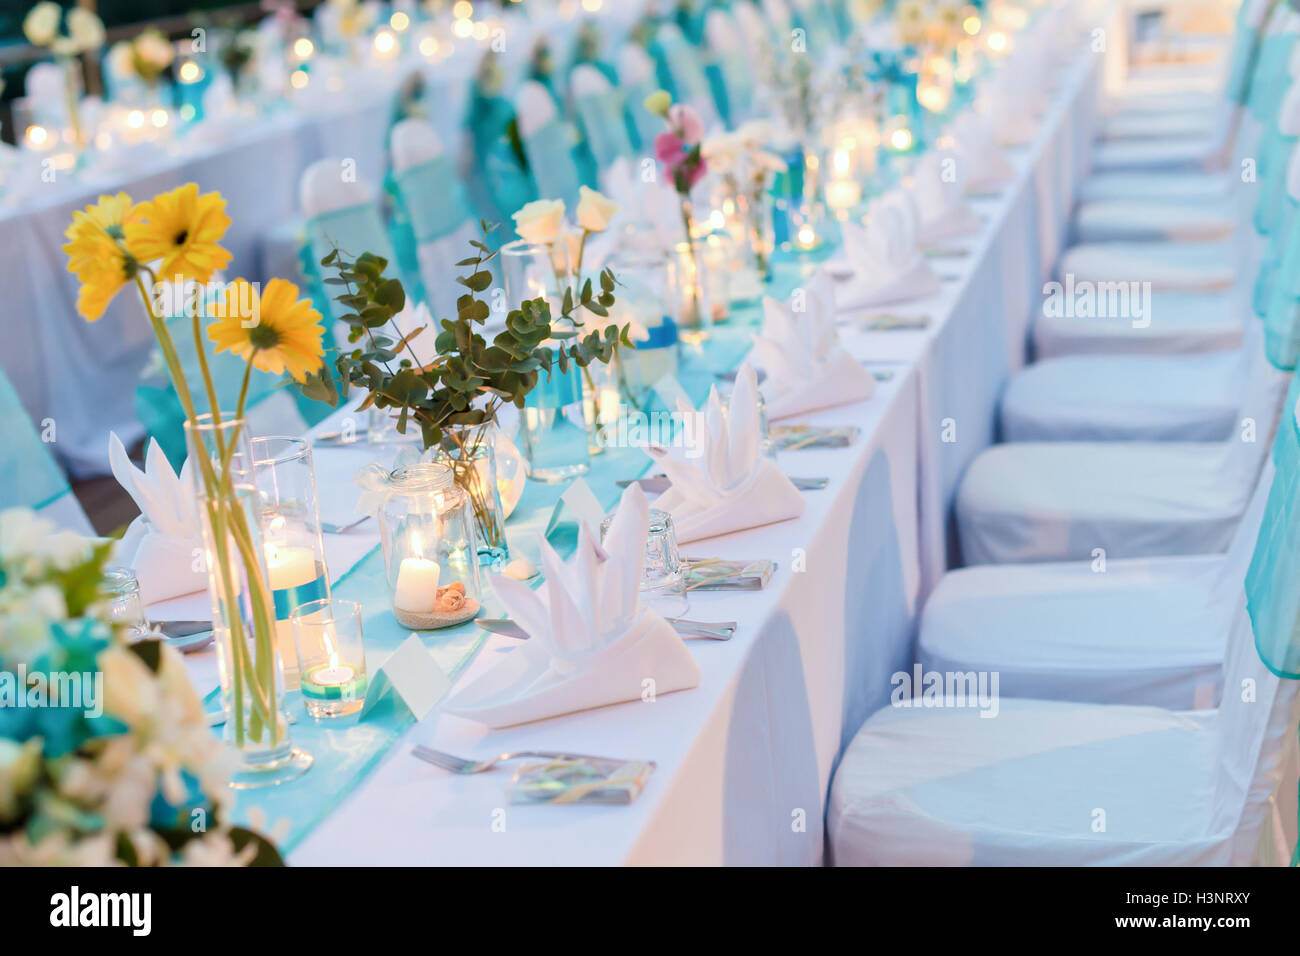 baby blue and yellow wedding theme